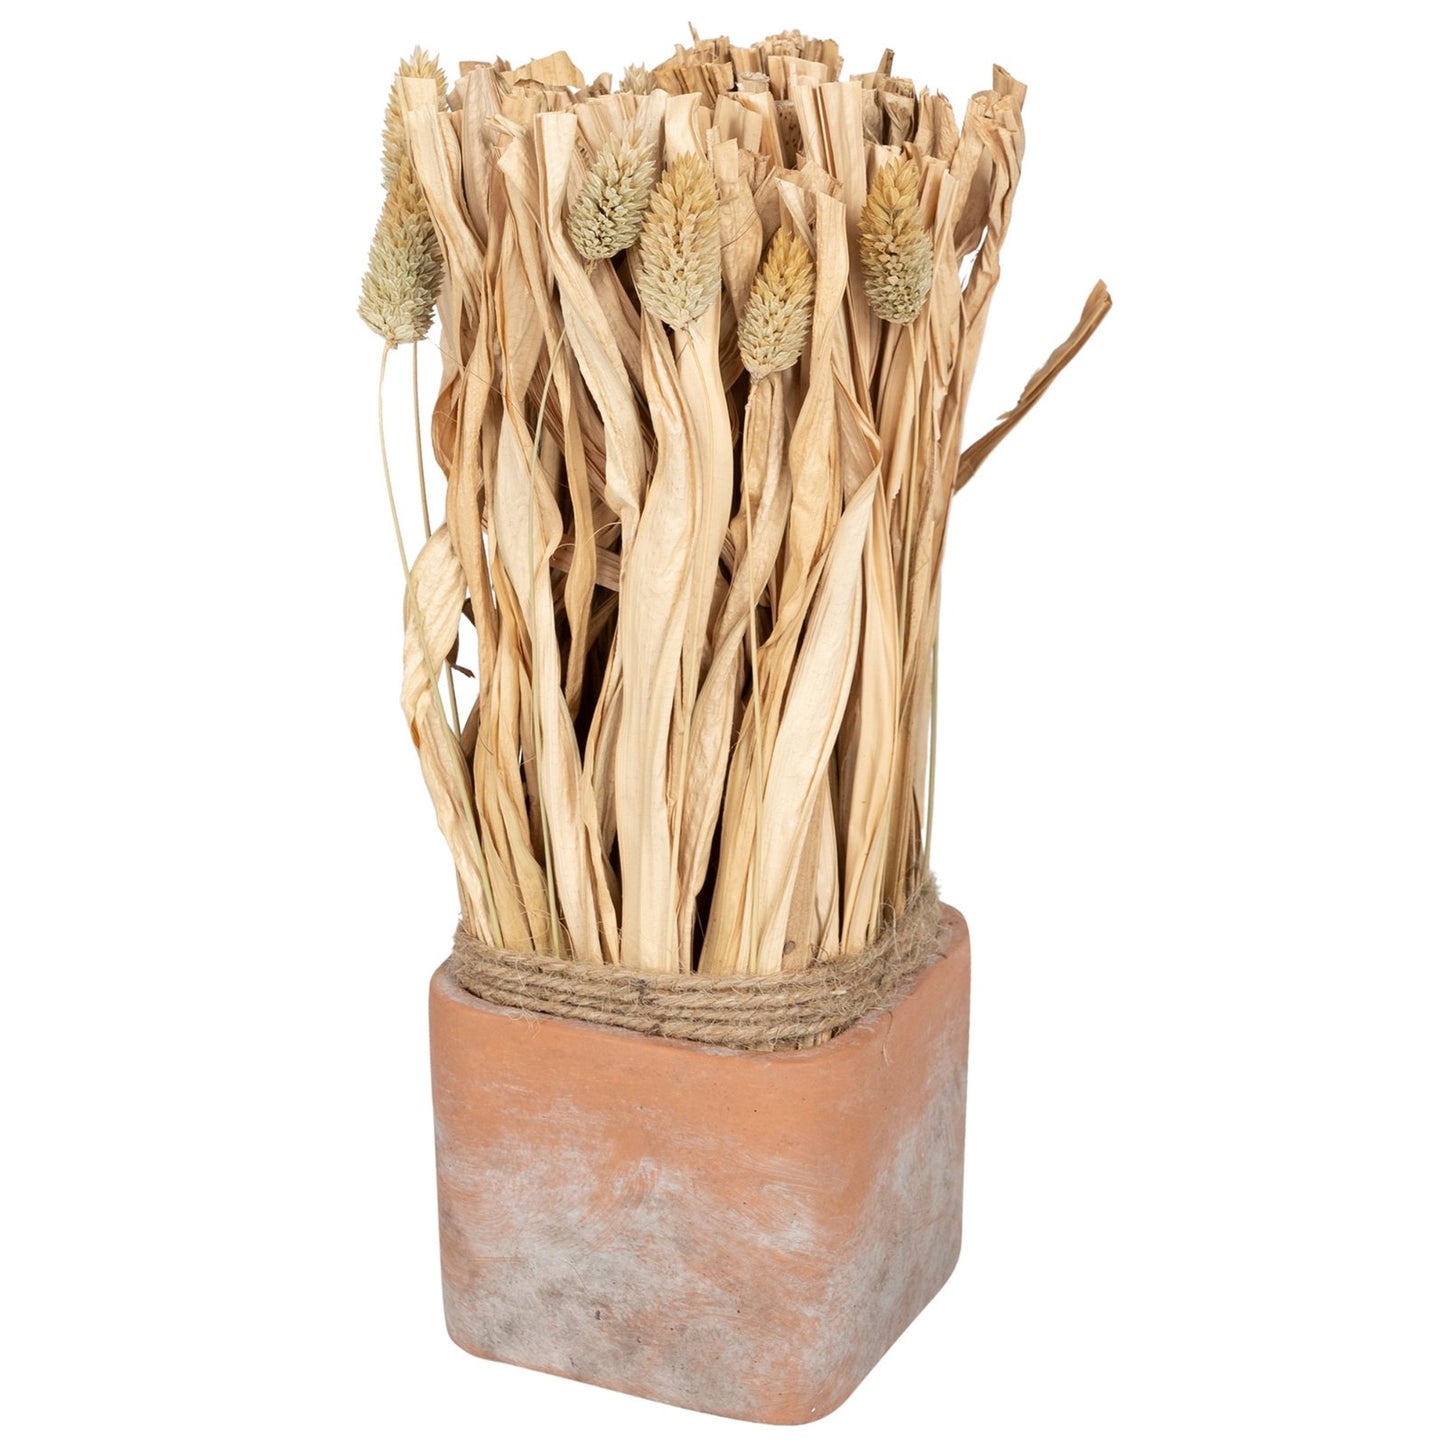 Fluffy Dried Grass Bouquet in Terracotta Pot- Large Willow and Wine